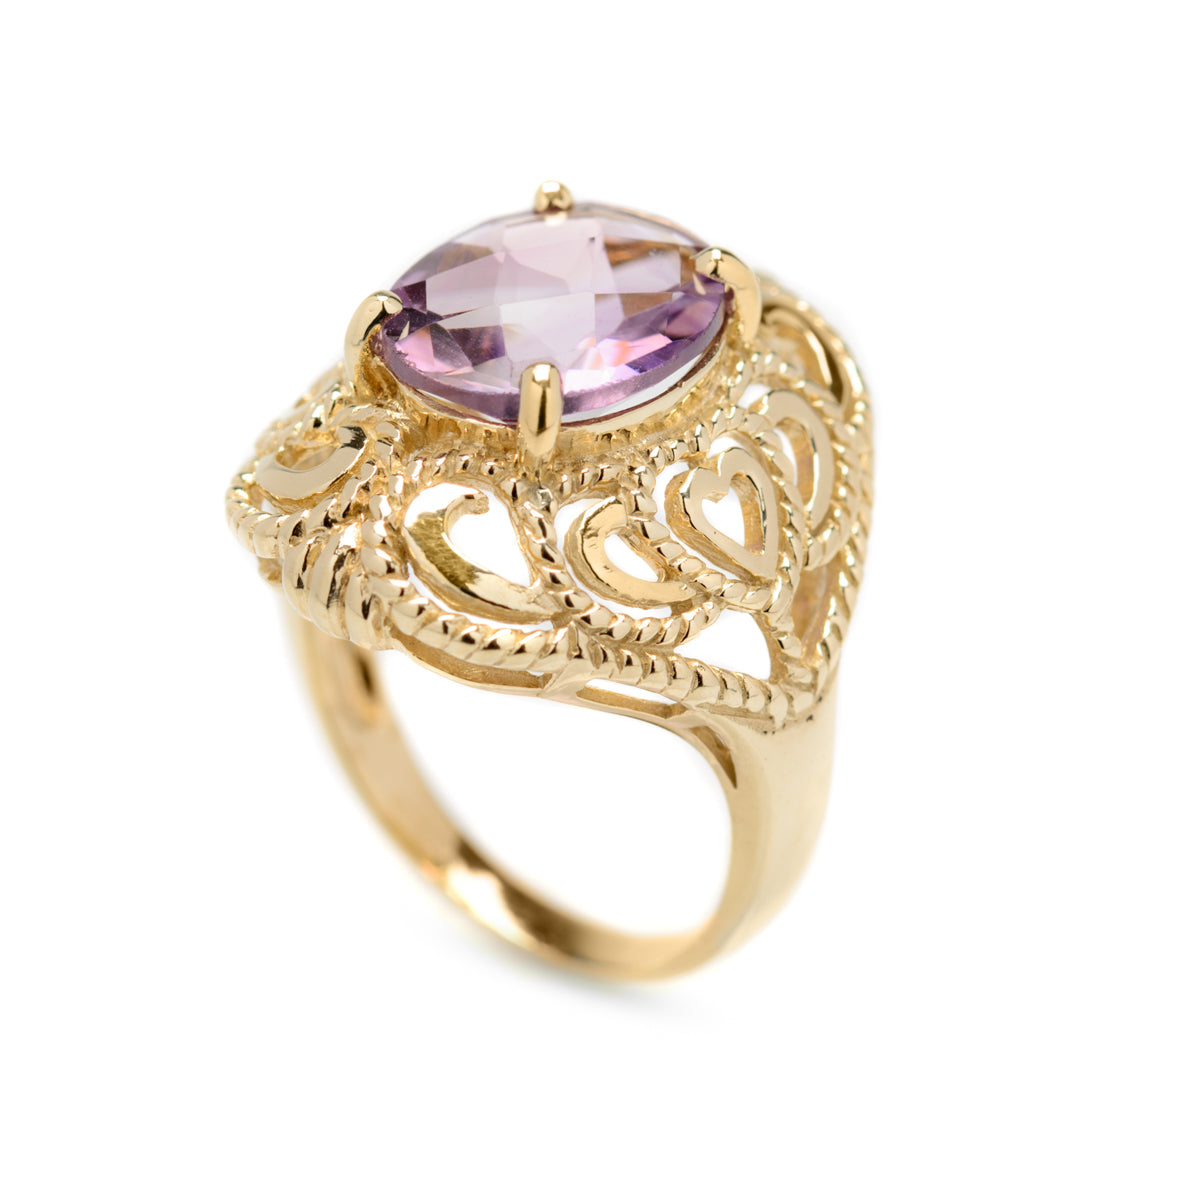 9ct Gold & 3.75 Carat Amethyst Large Cocktail Ring Filigree Heart Mount (Code A957)